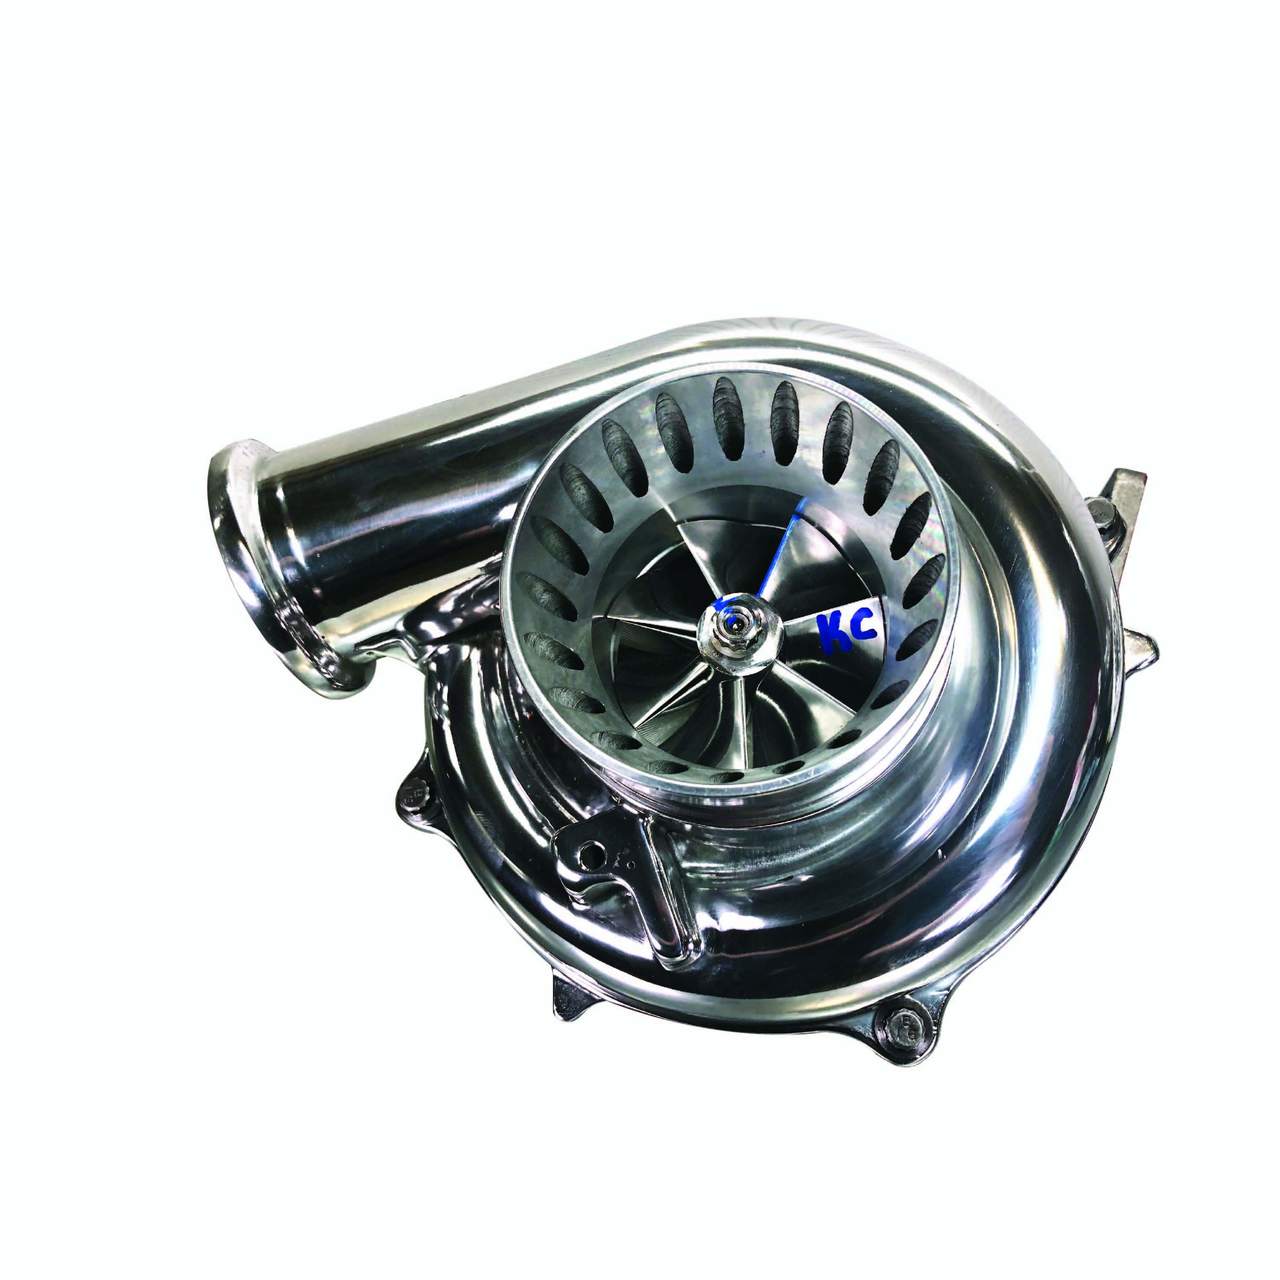 TP38r Stage 3 Dual Ball Bearing Turbo - 7.3 Powerstroke OBS (1994-1998)